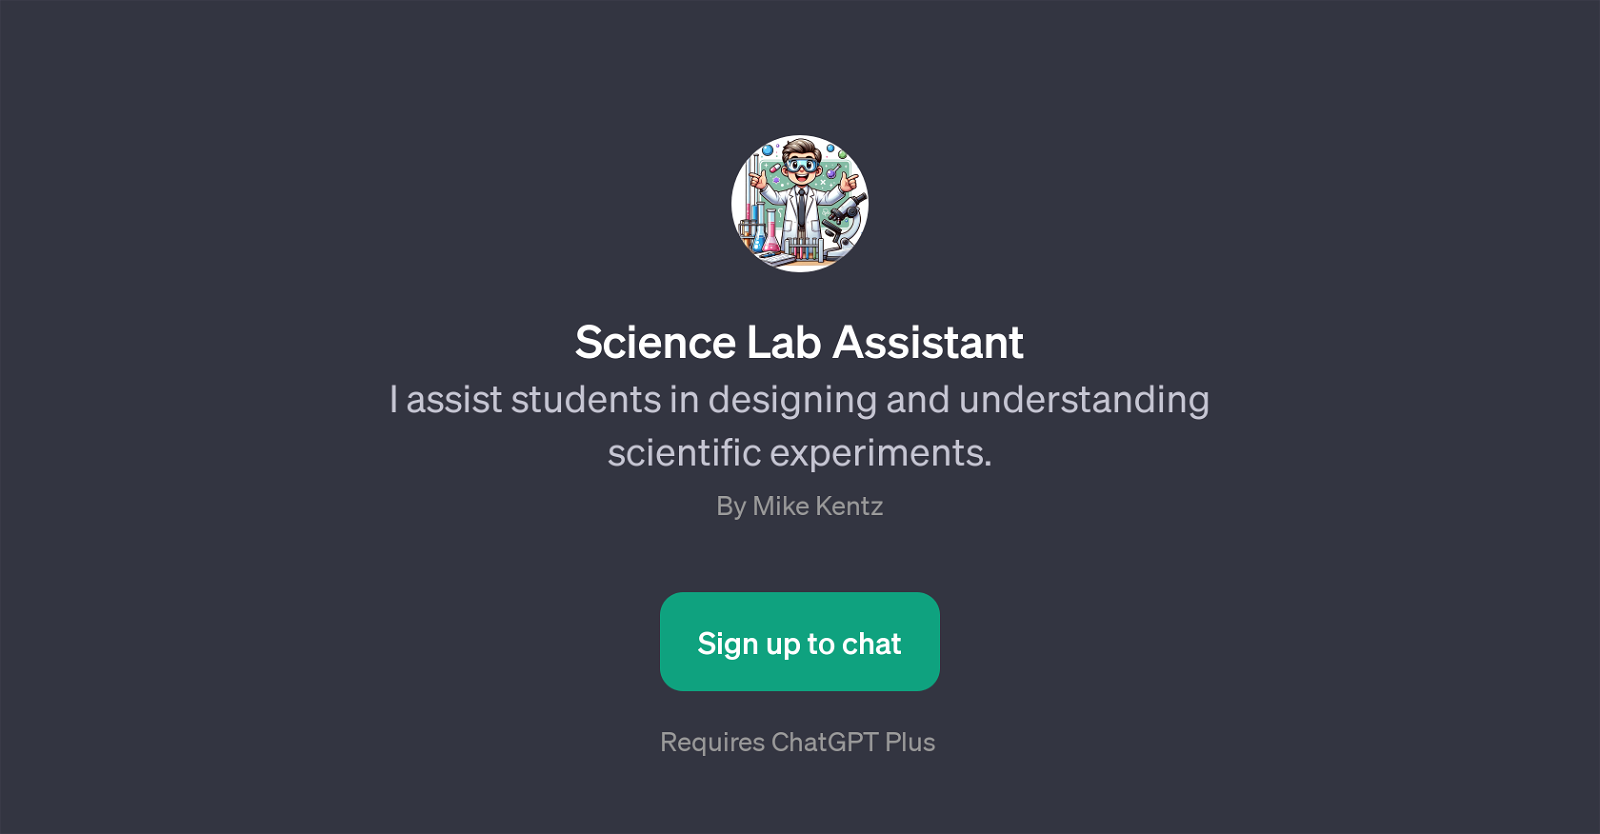 Science Lab Assistant website